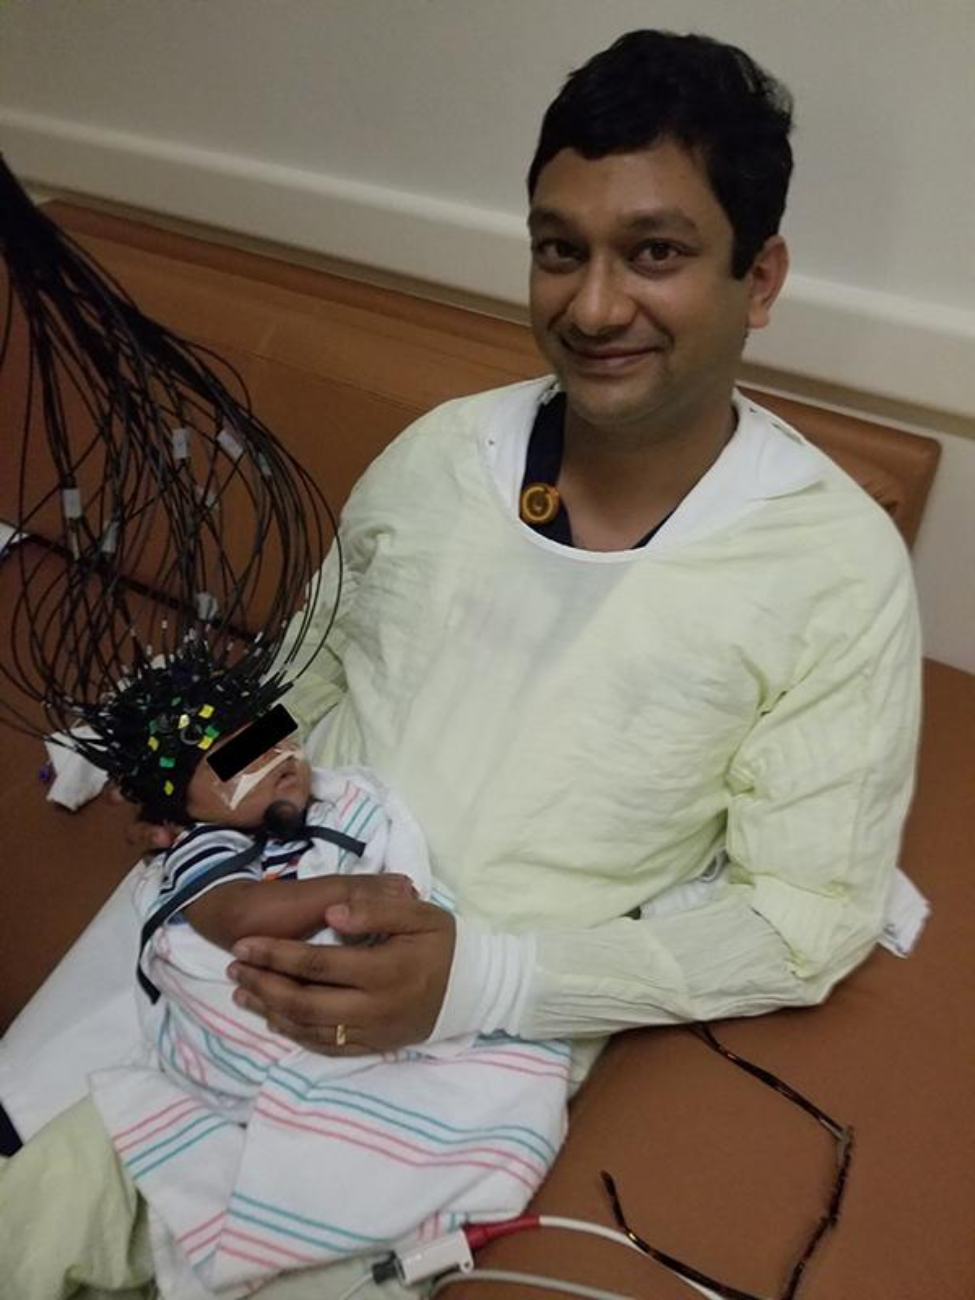 Co-lead investigator Manish N. Shah, MD, holds a patient while an earlier version of the Cap-based Transcranial Optical Tomography (CTOT) device captures whole-brain imaging in minutes. (Photo courtesy of Manish N. Shah, MD)